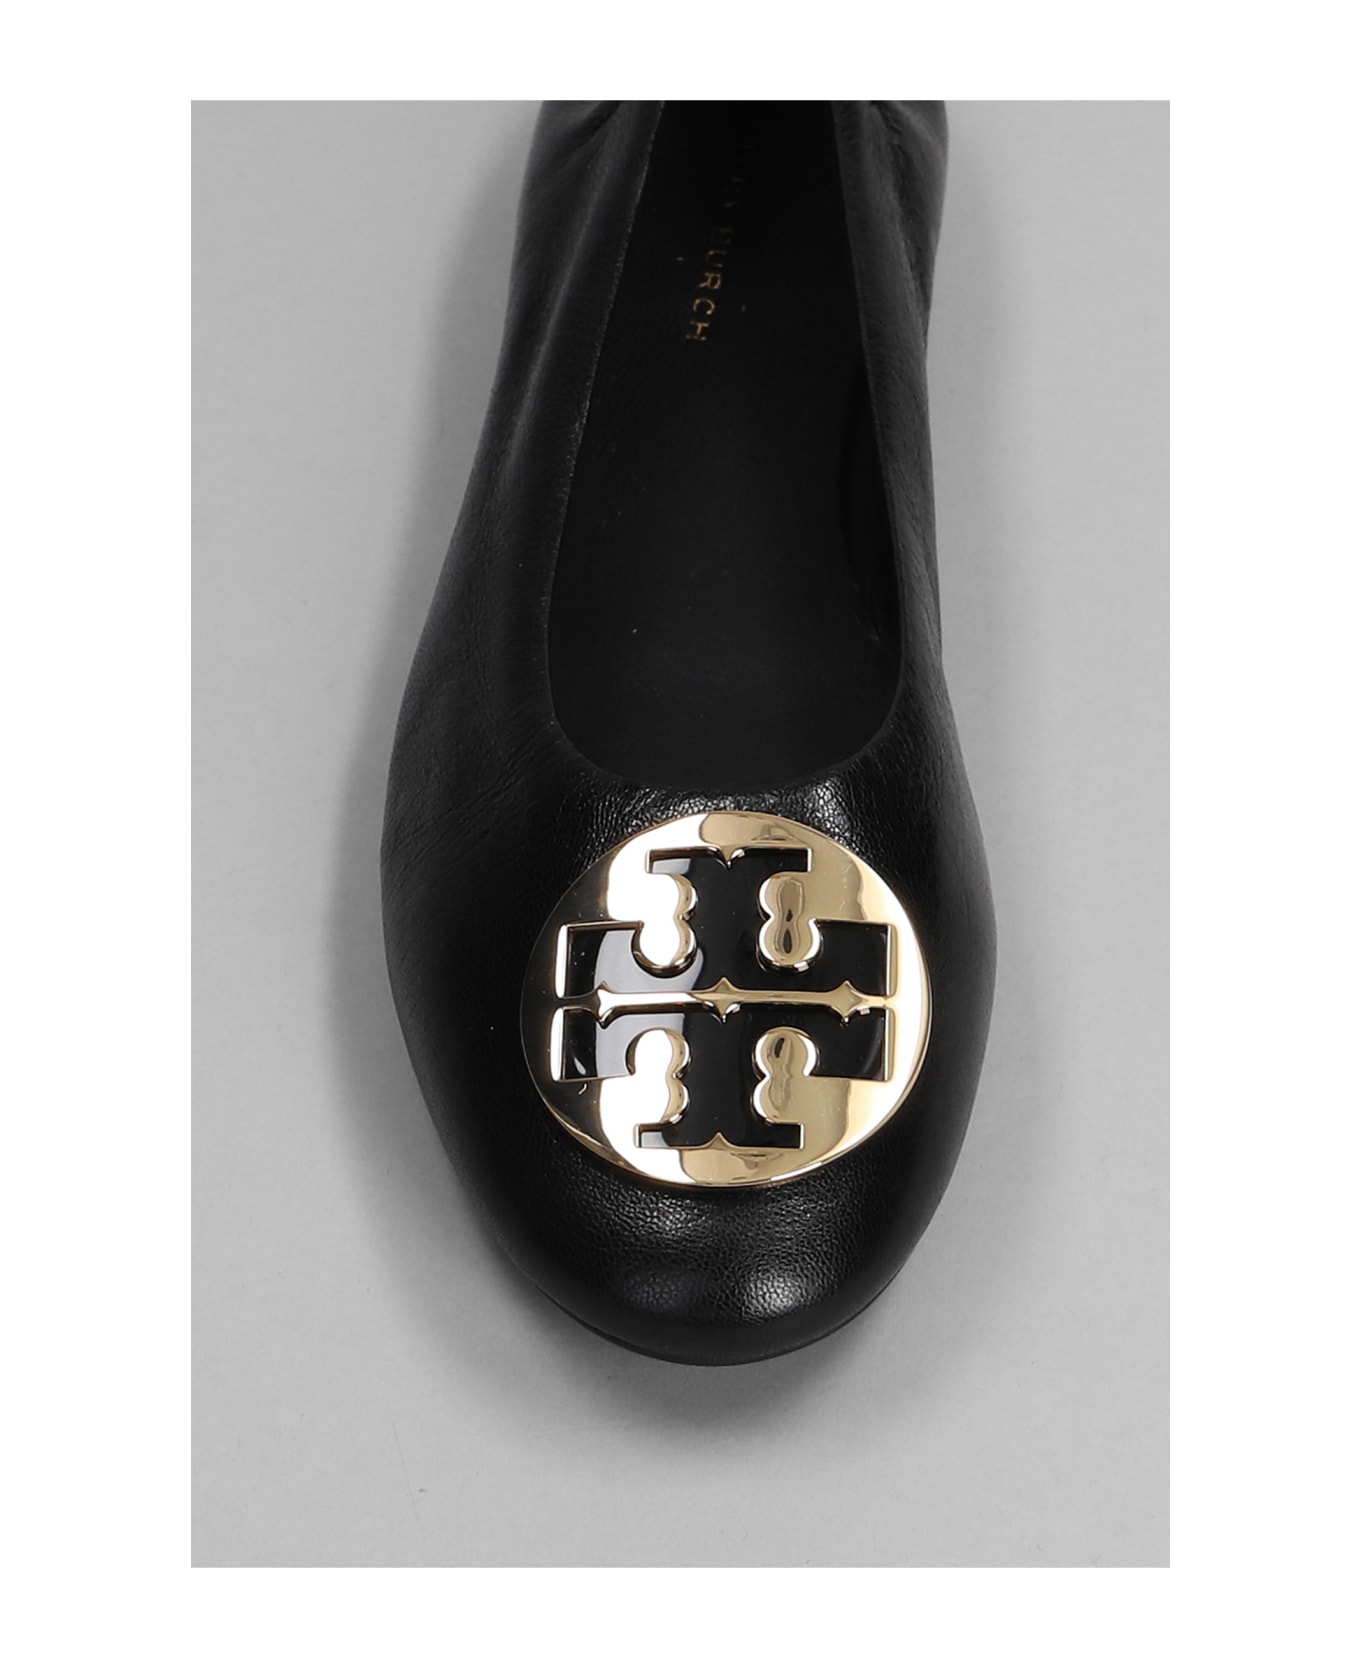 Tory Burch Ballet Flats In Black Leather - black